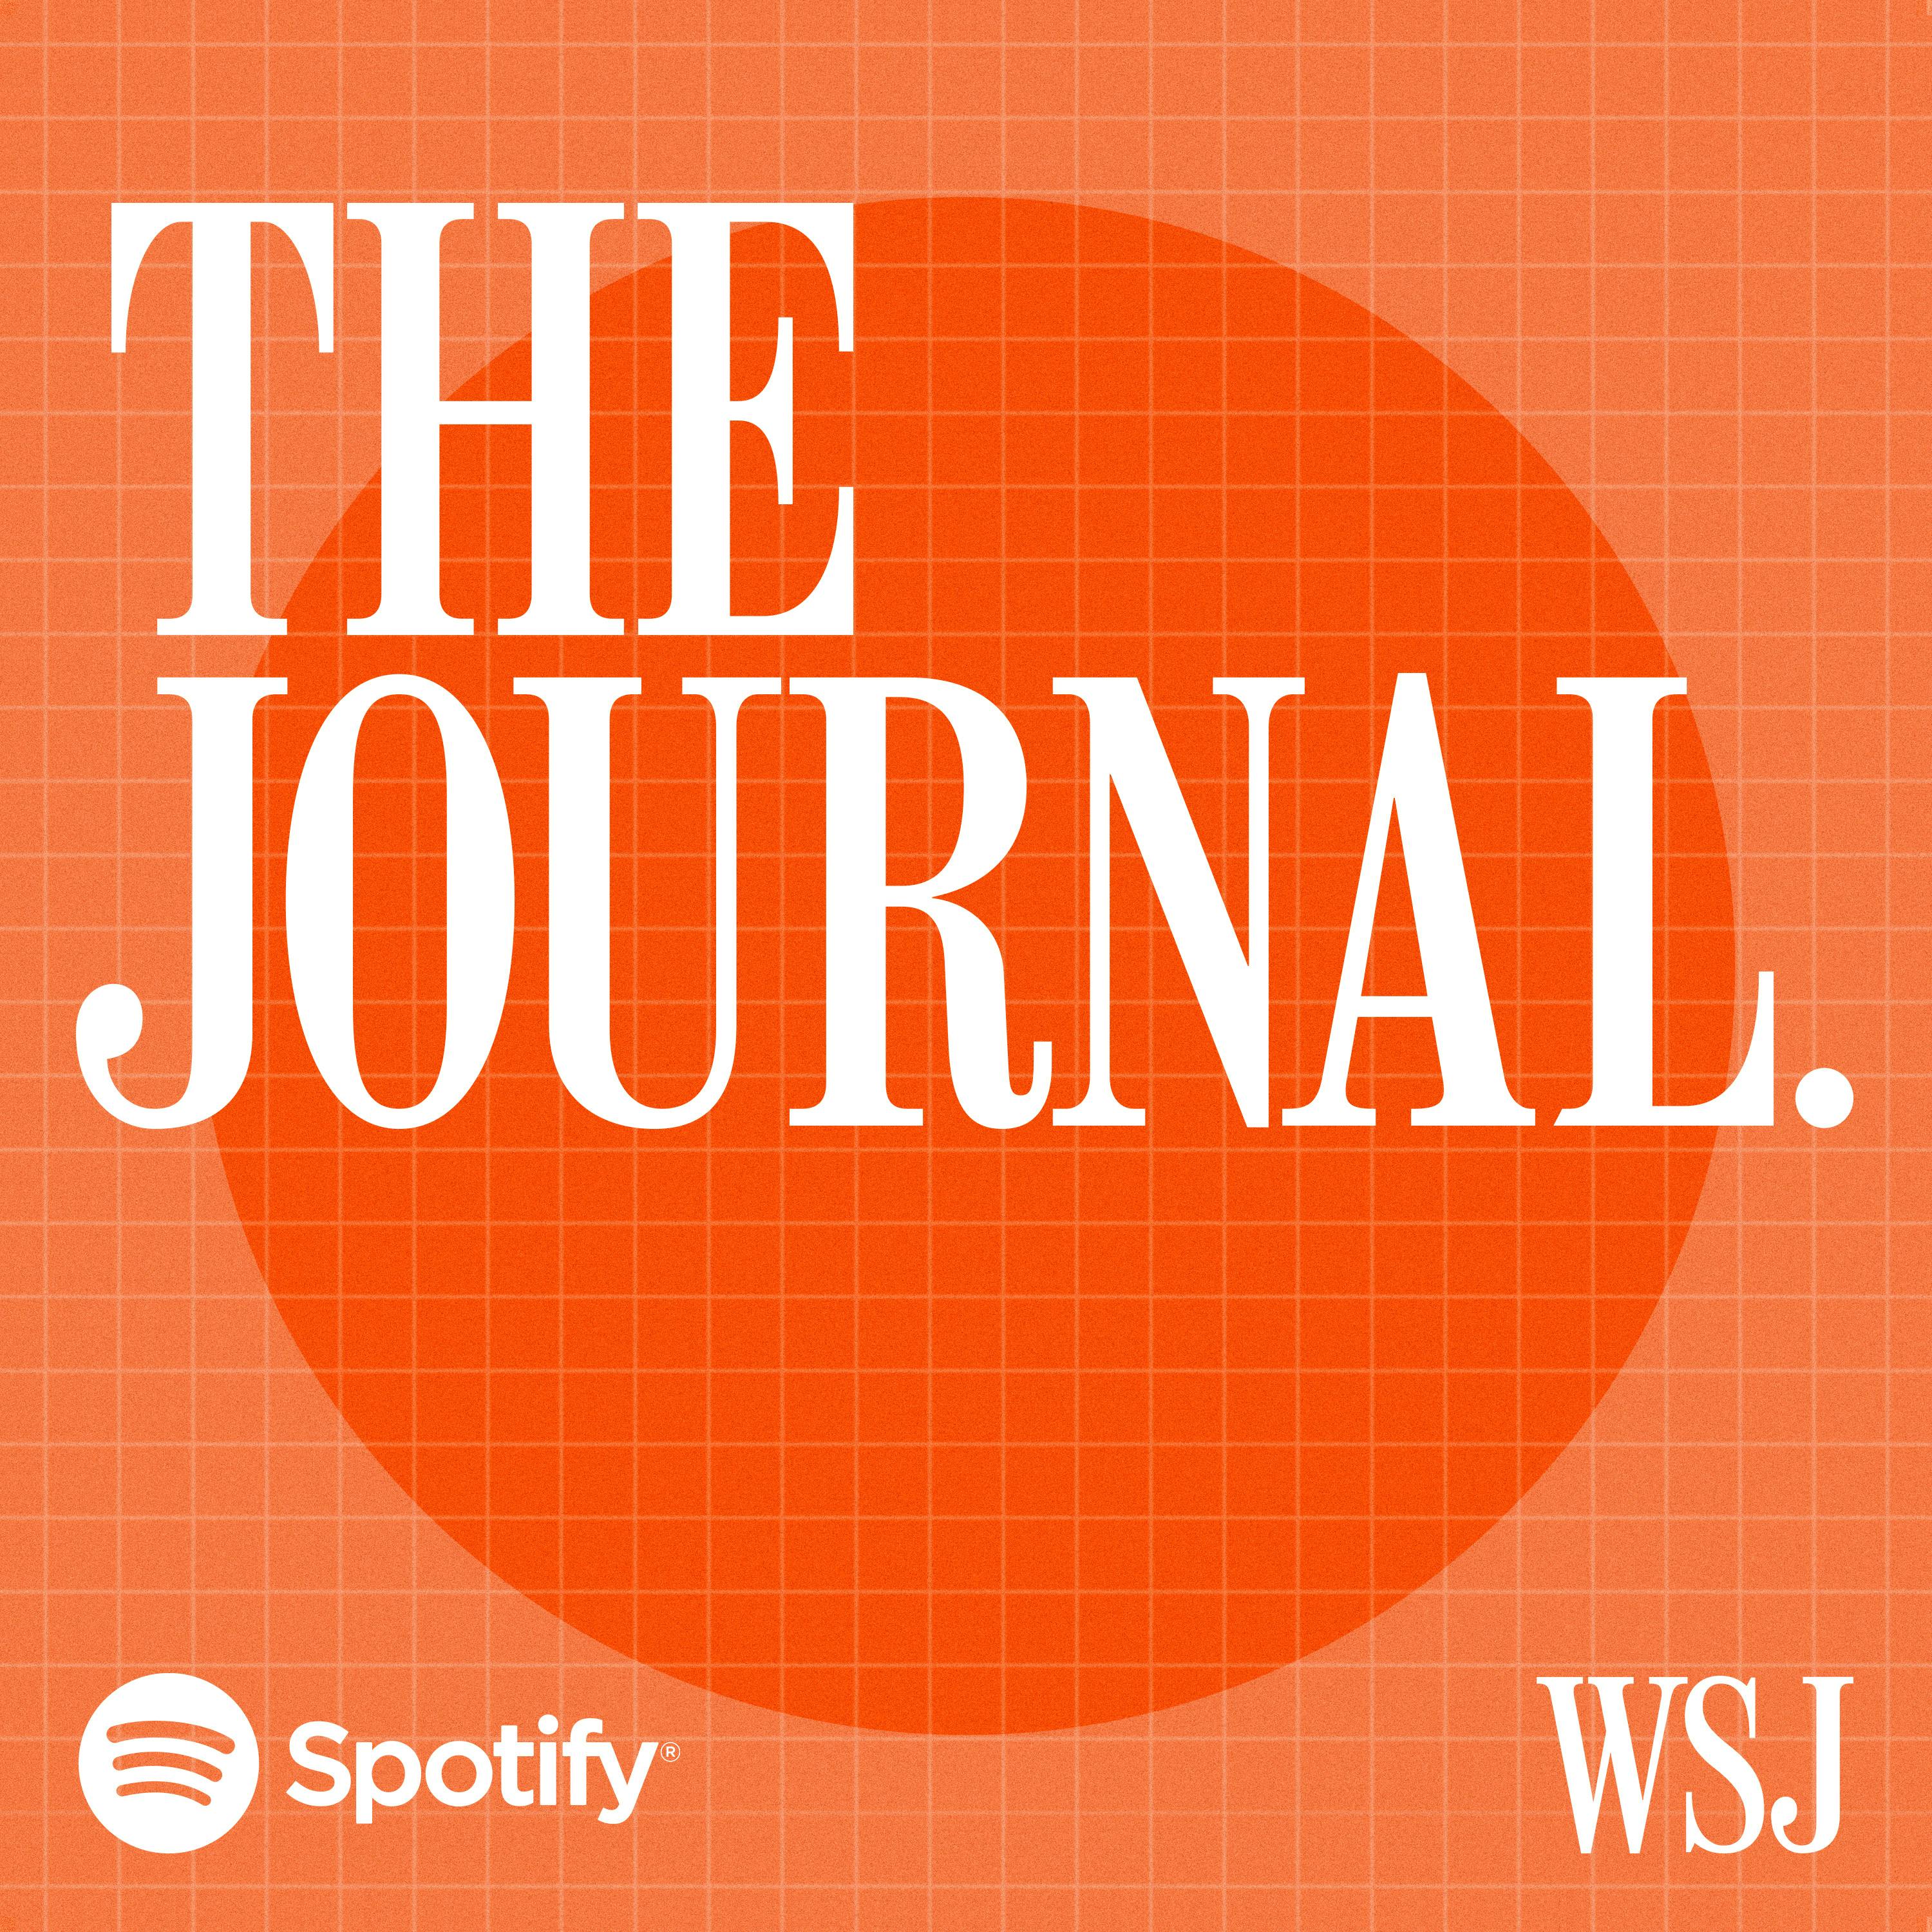 The Journal. podcast show image